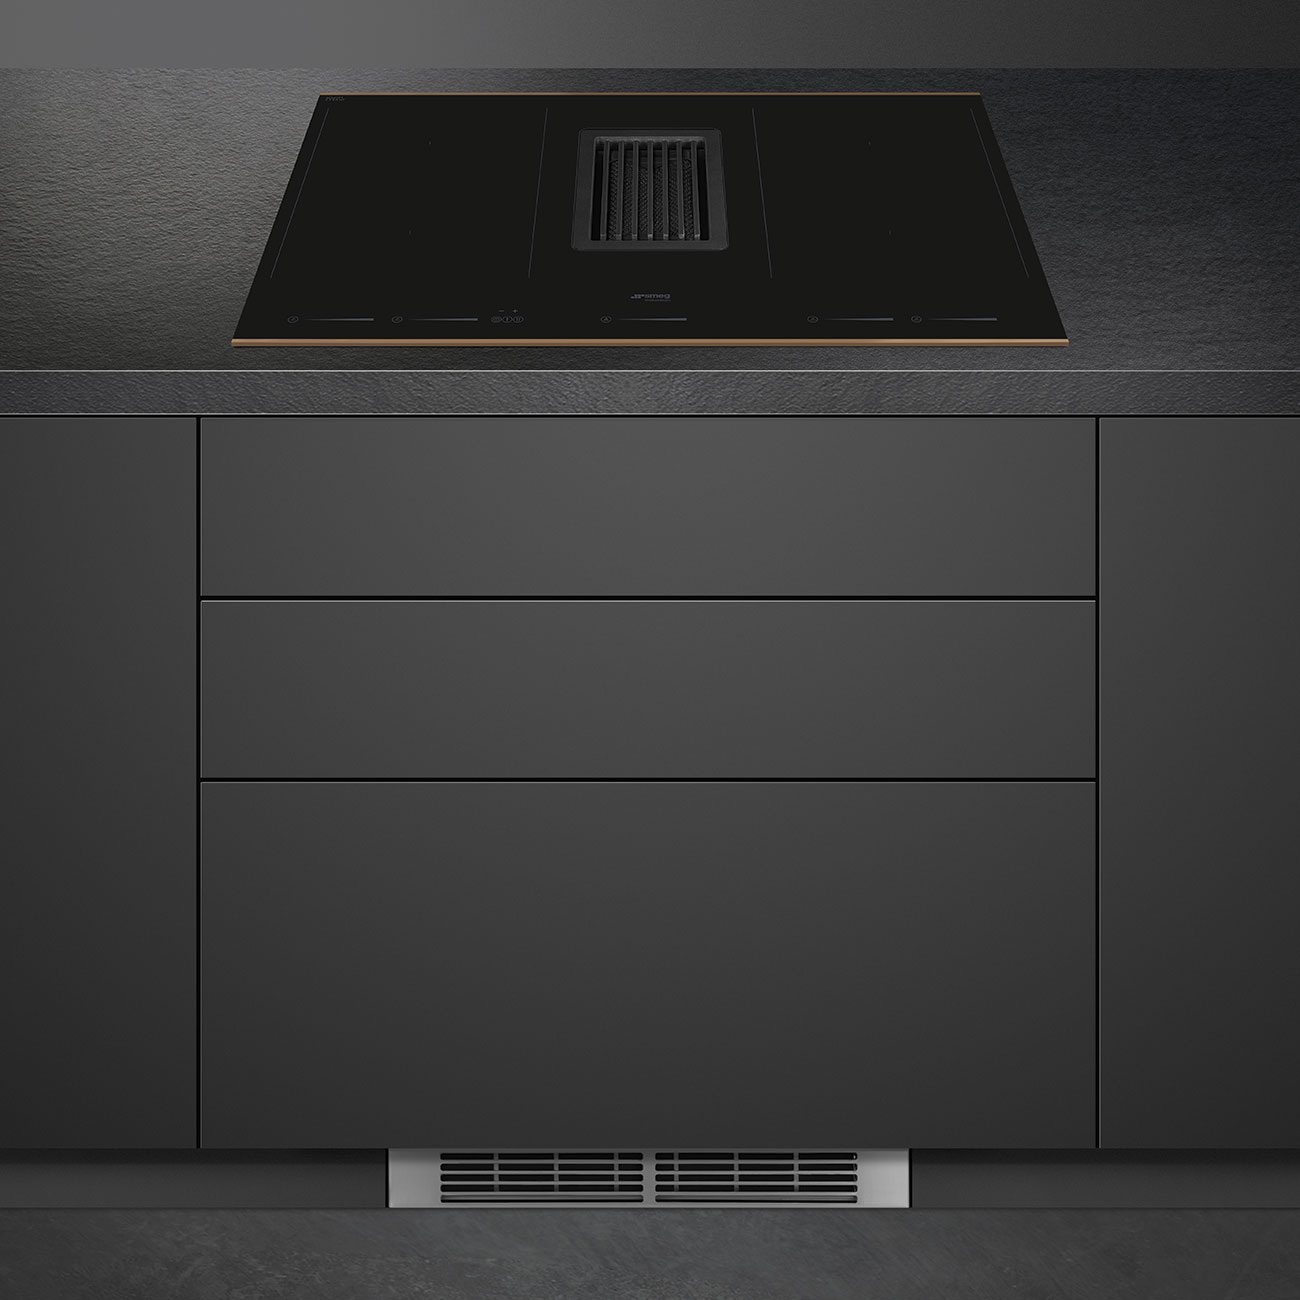 Induction with integrated hood Hob Smeg_9